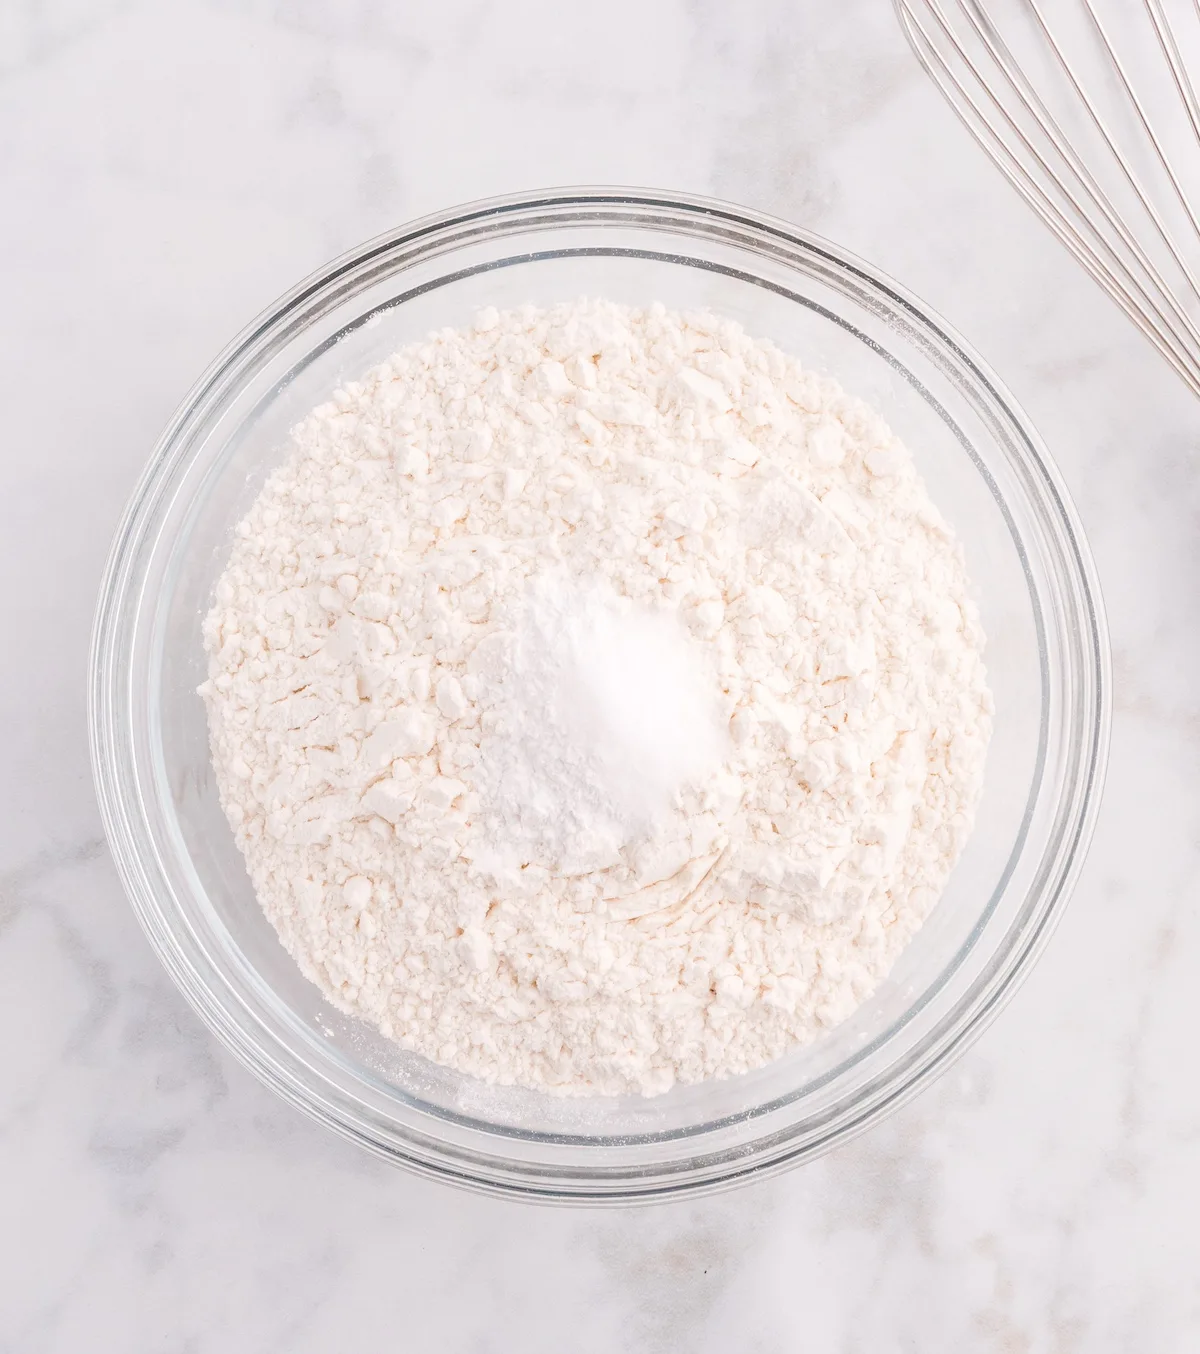 Flour, baking soda, and salt whisked together in a bowl